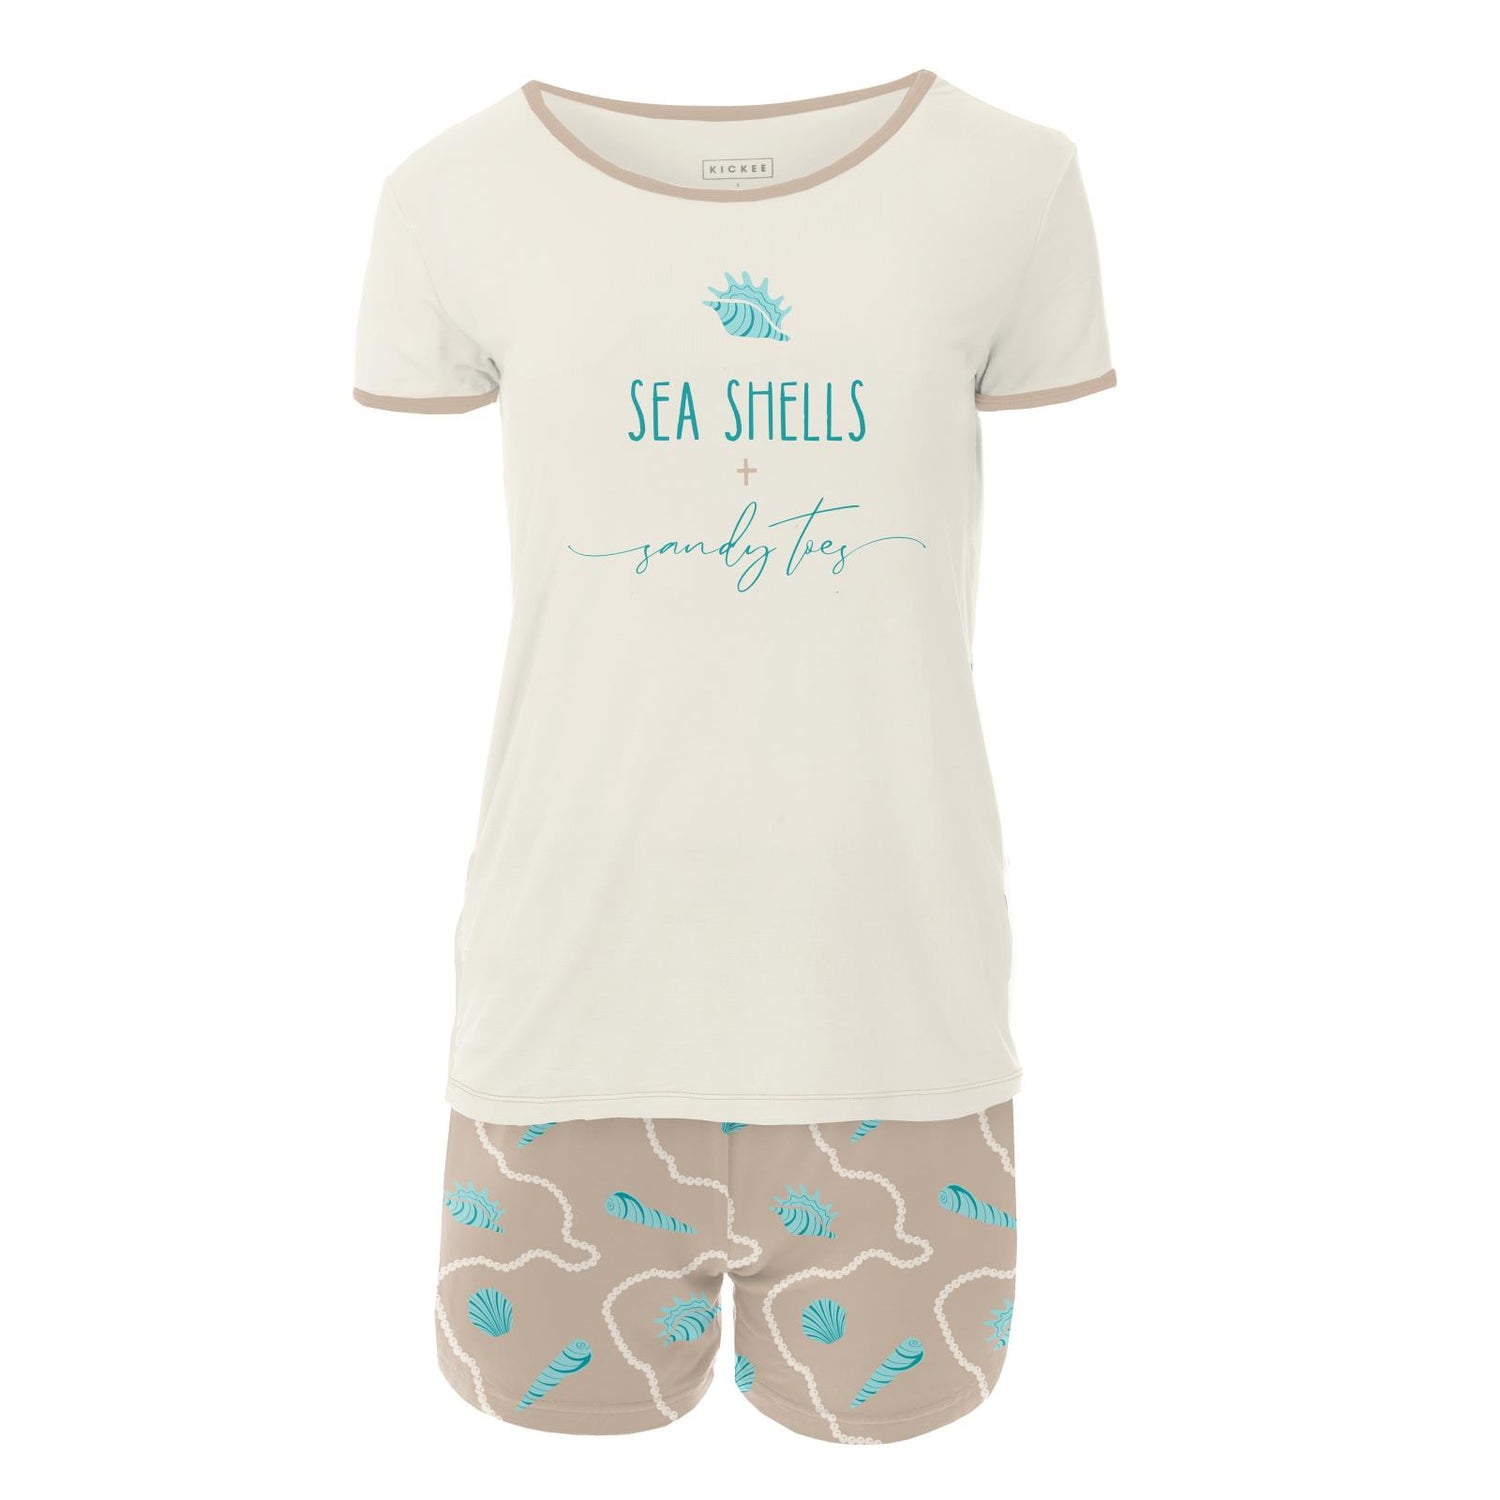 Women's Short Sleeve Graphic Tee Fitted Pajama Set with Shorts in Burlap Shells